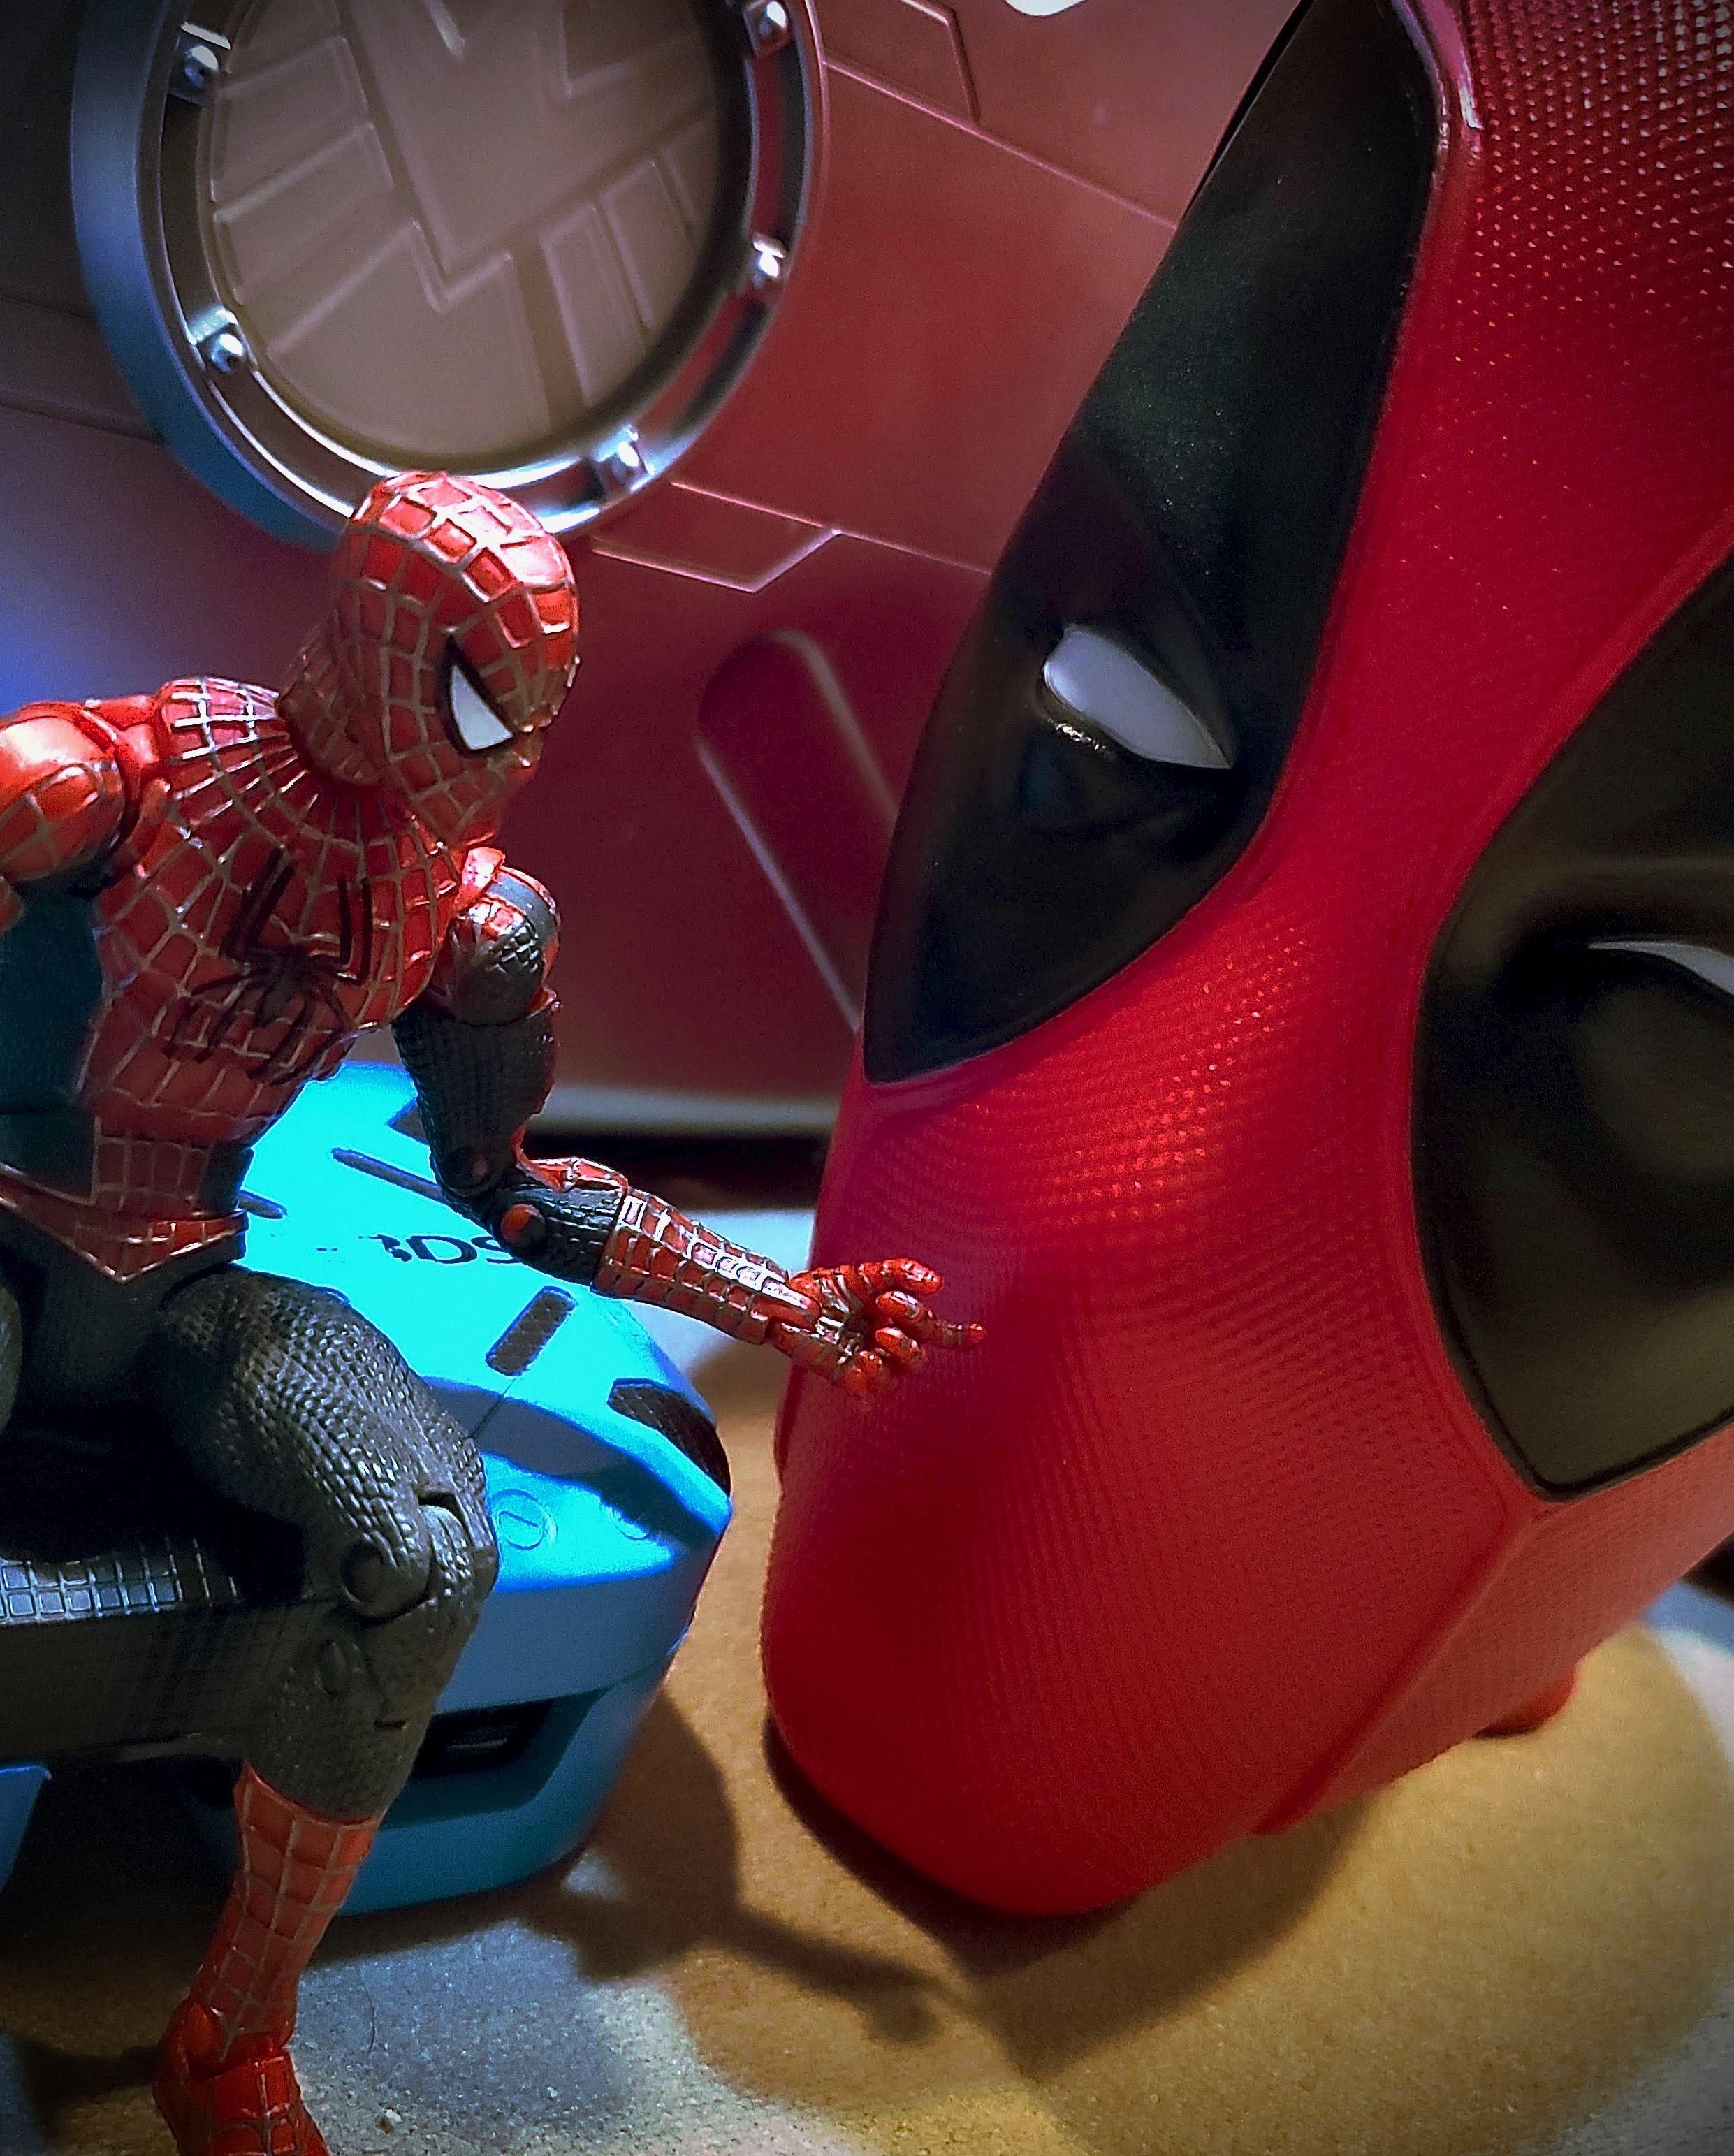 Spider-man toy having a discussion with Deadpool head